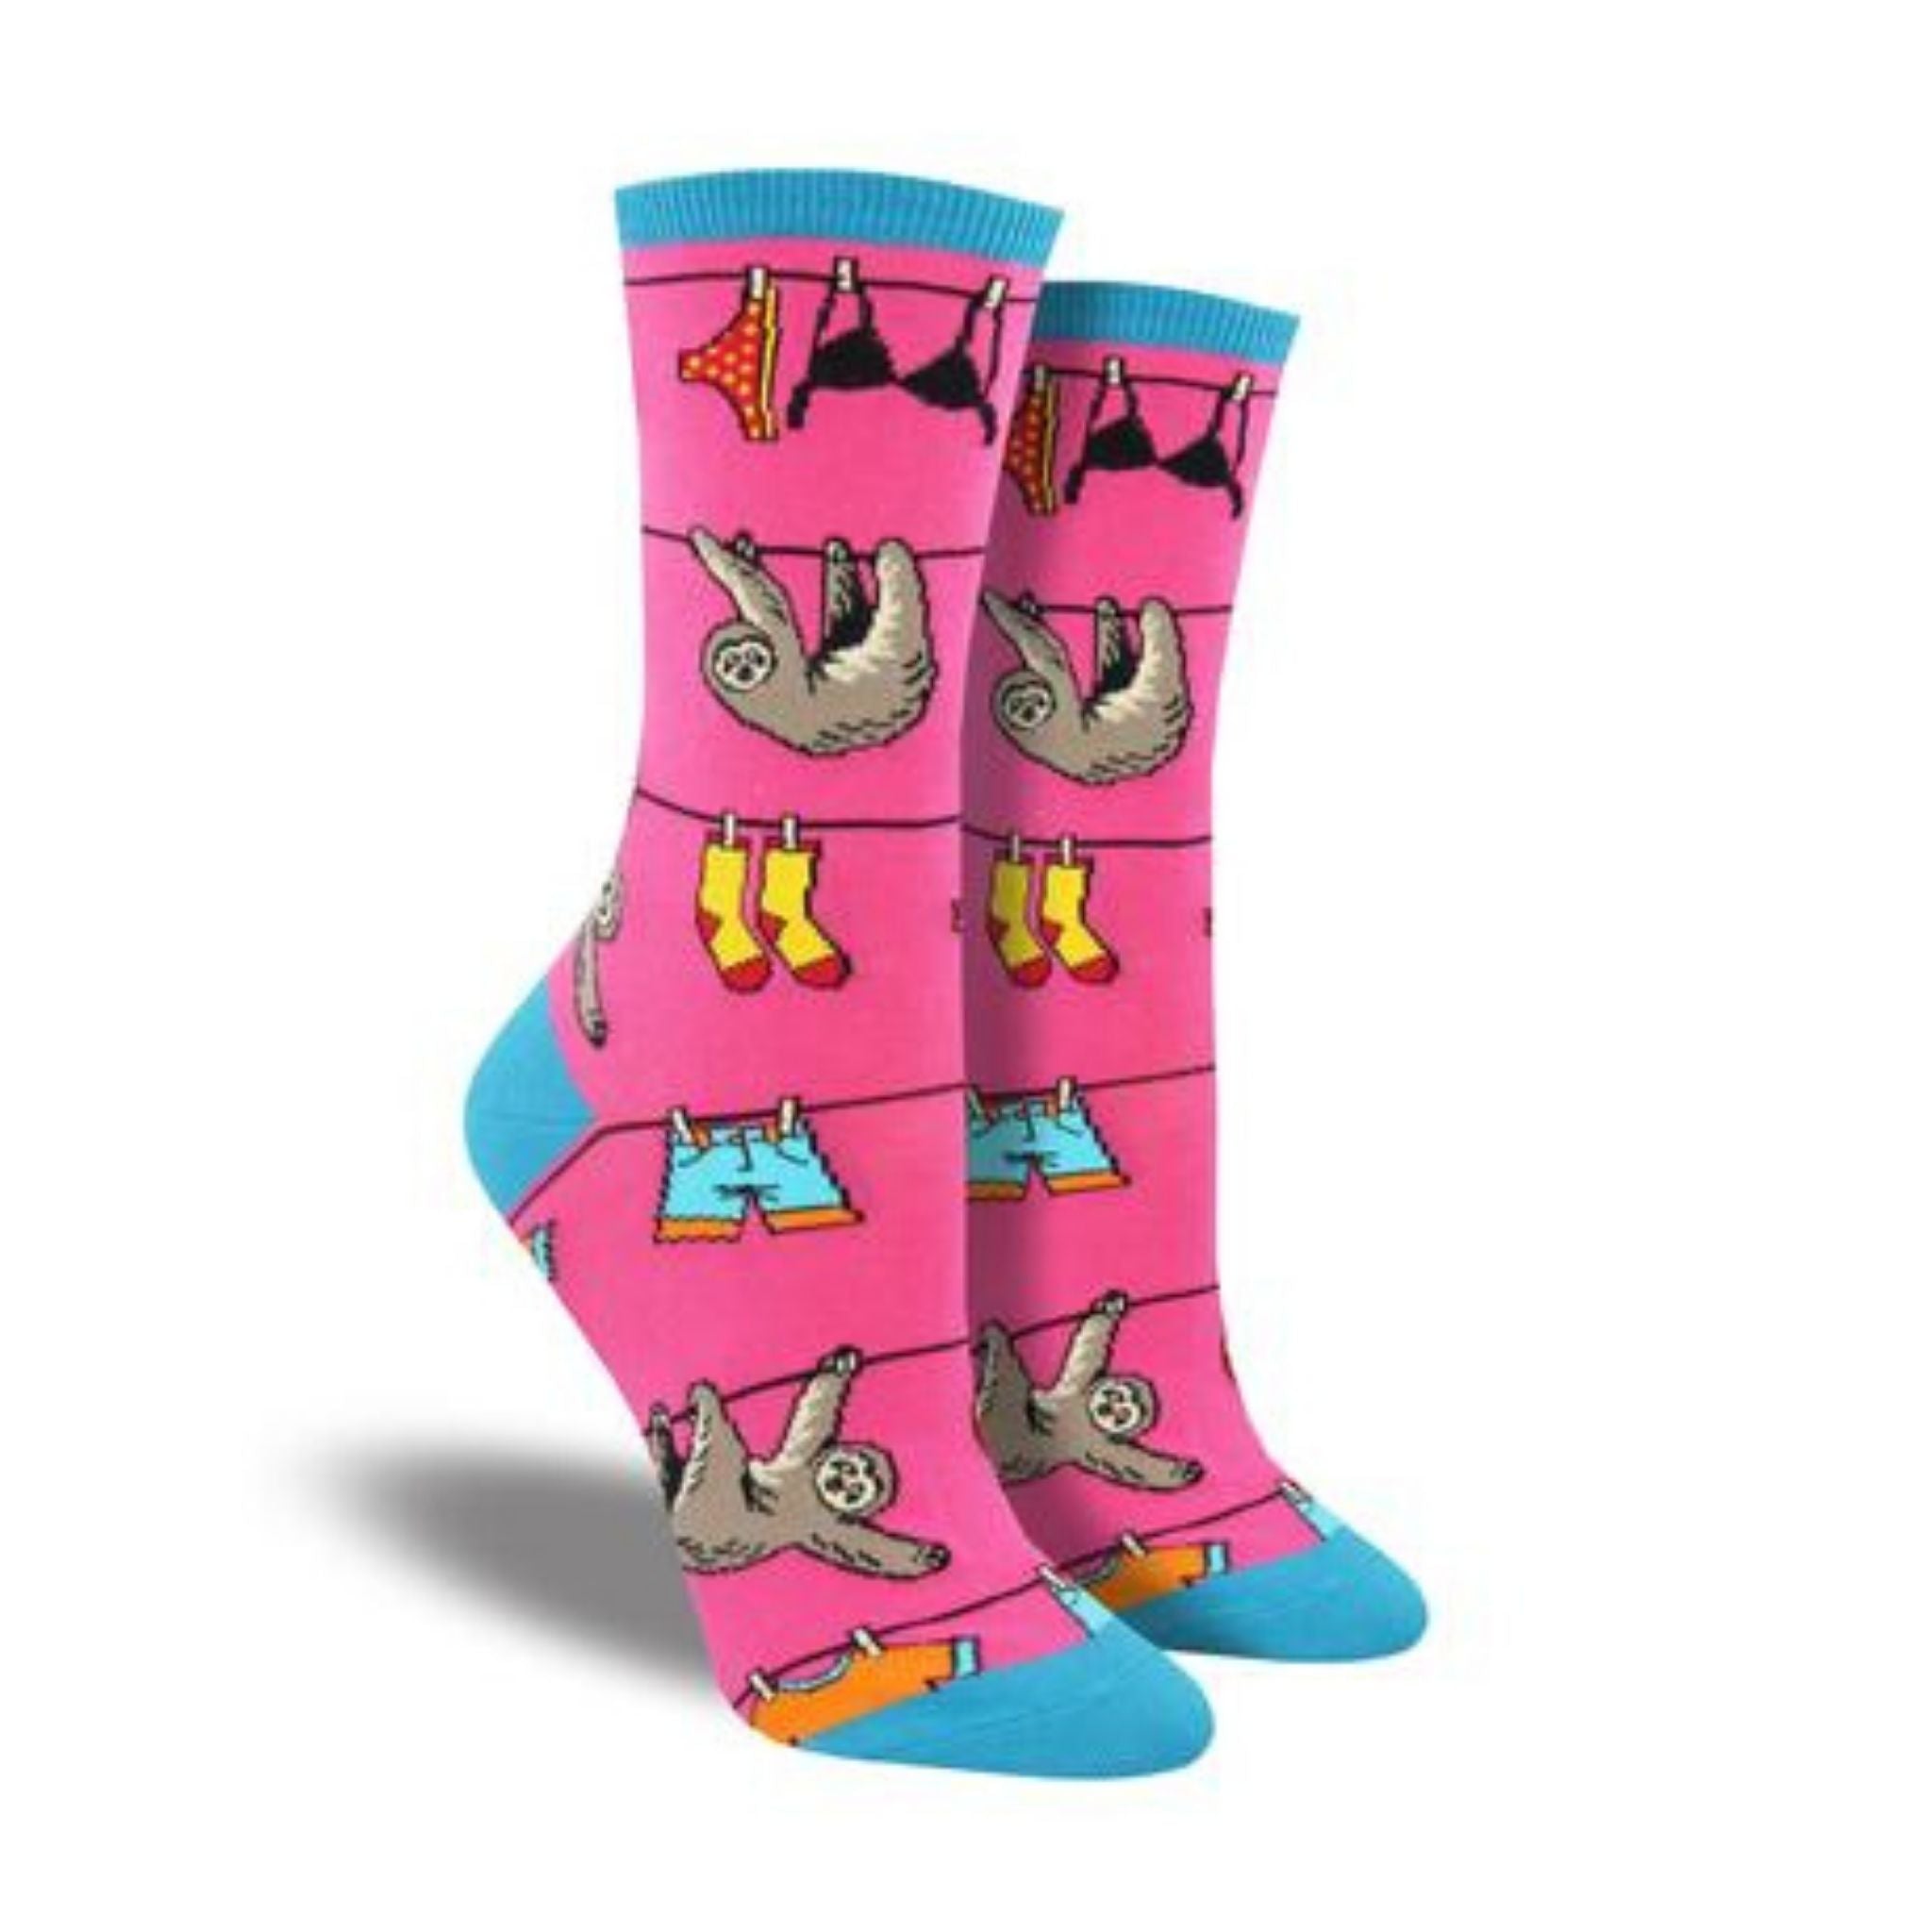 pink socks with blue accents featuring sloths climbing clothing line with items hanging to dry